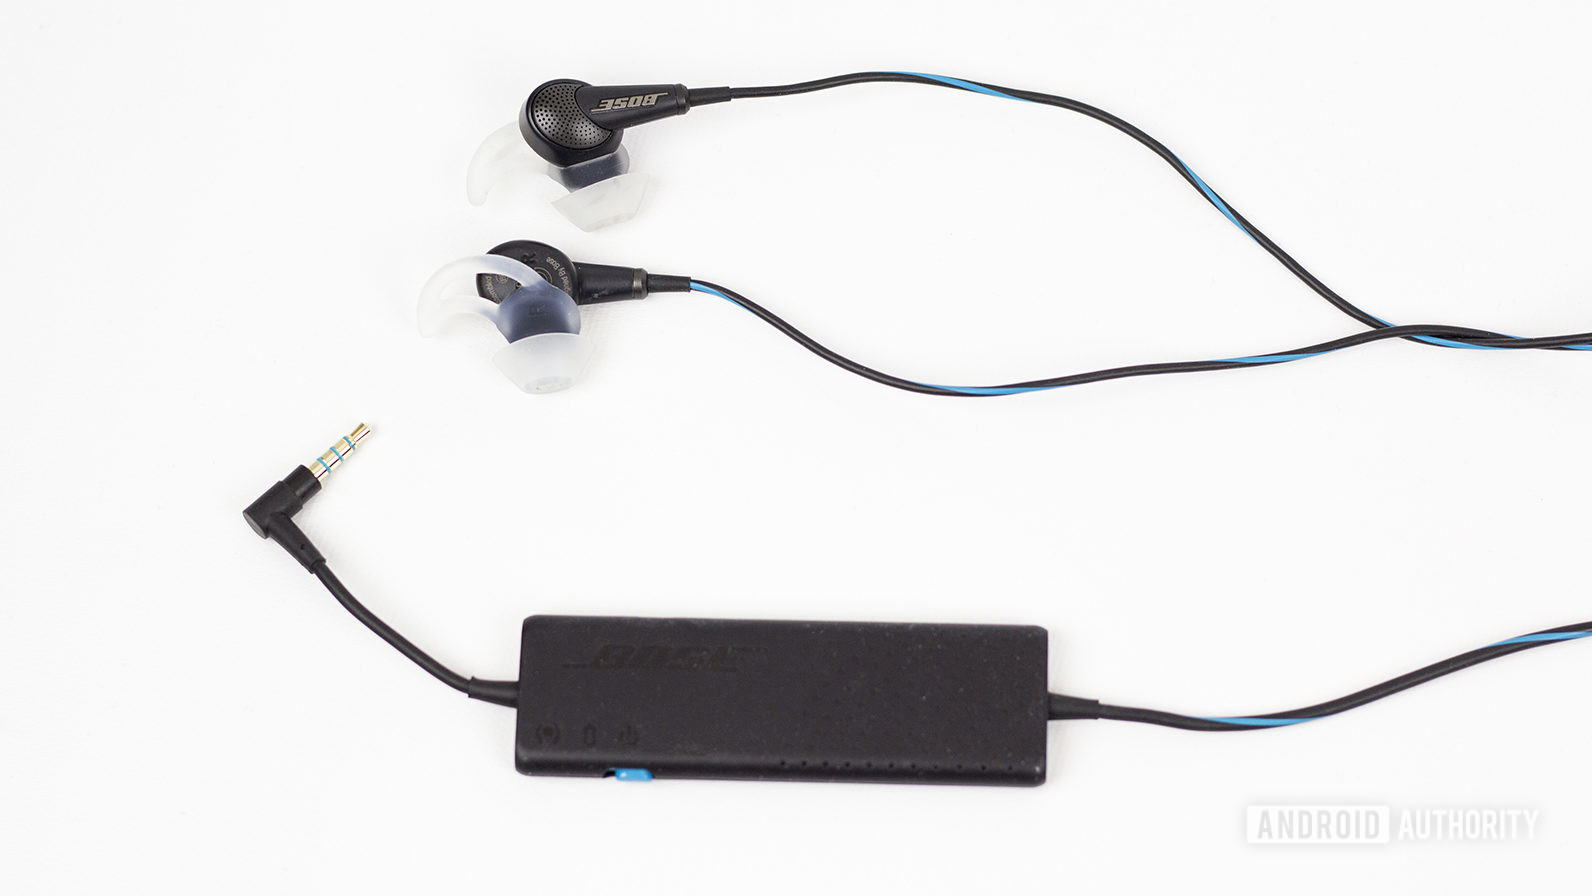 The Bose QuietComfort 20 e earbuds and control module of the Bose QC20.